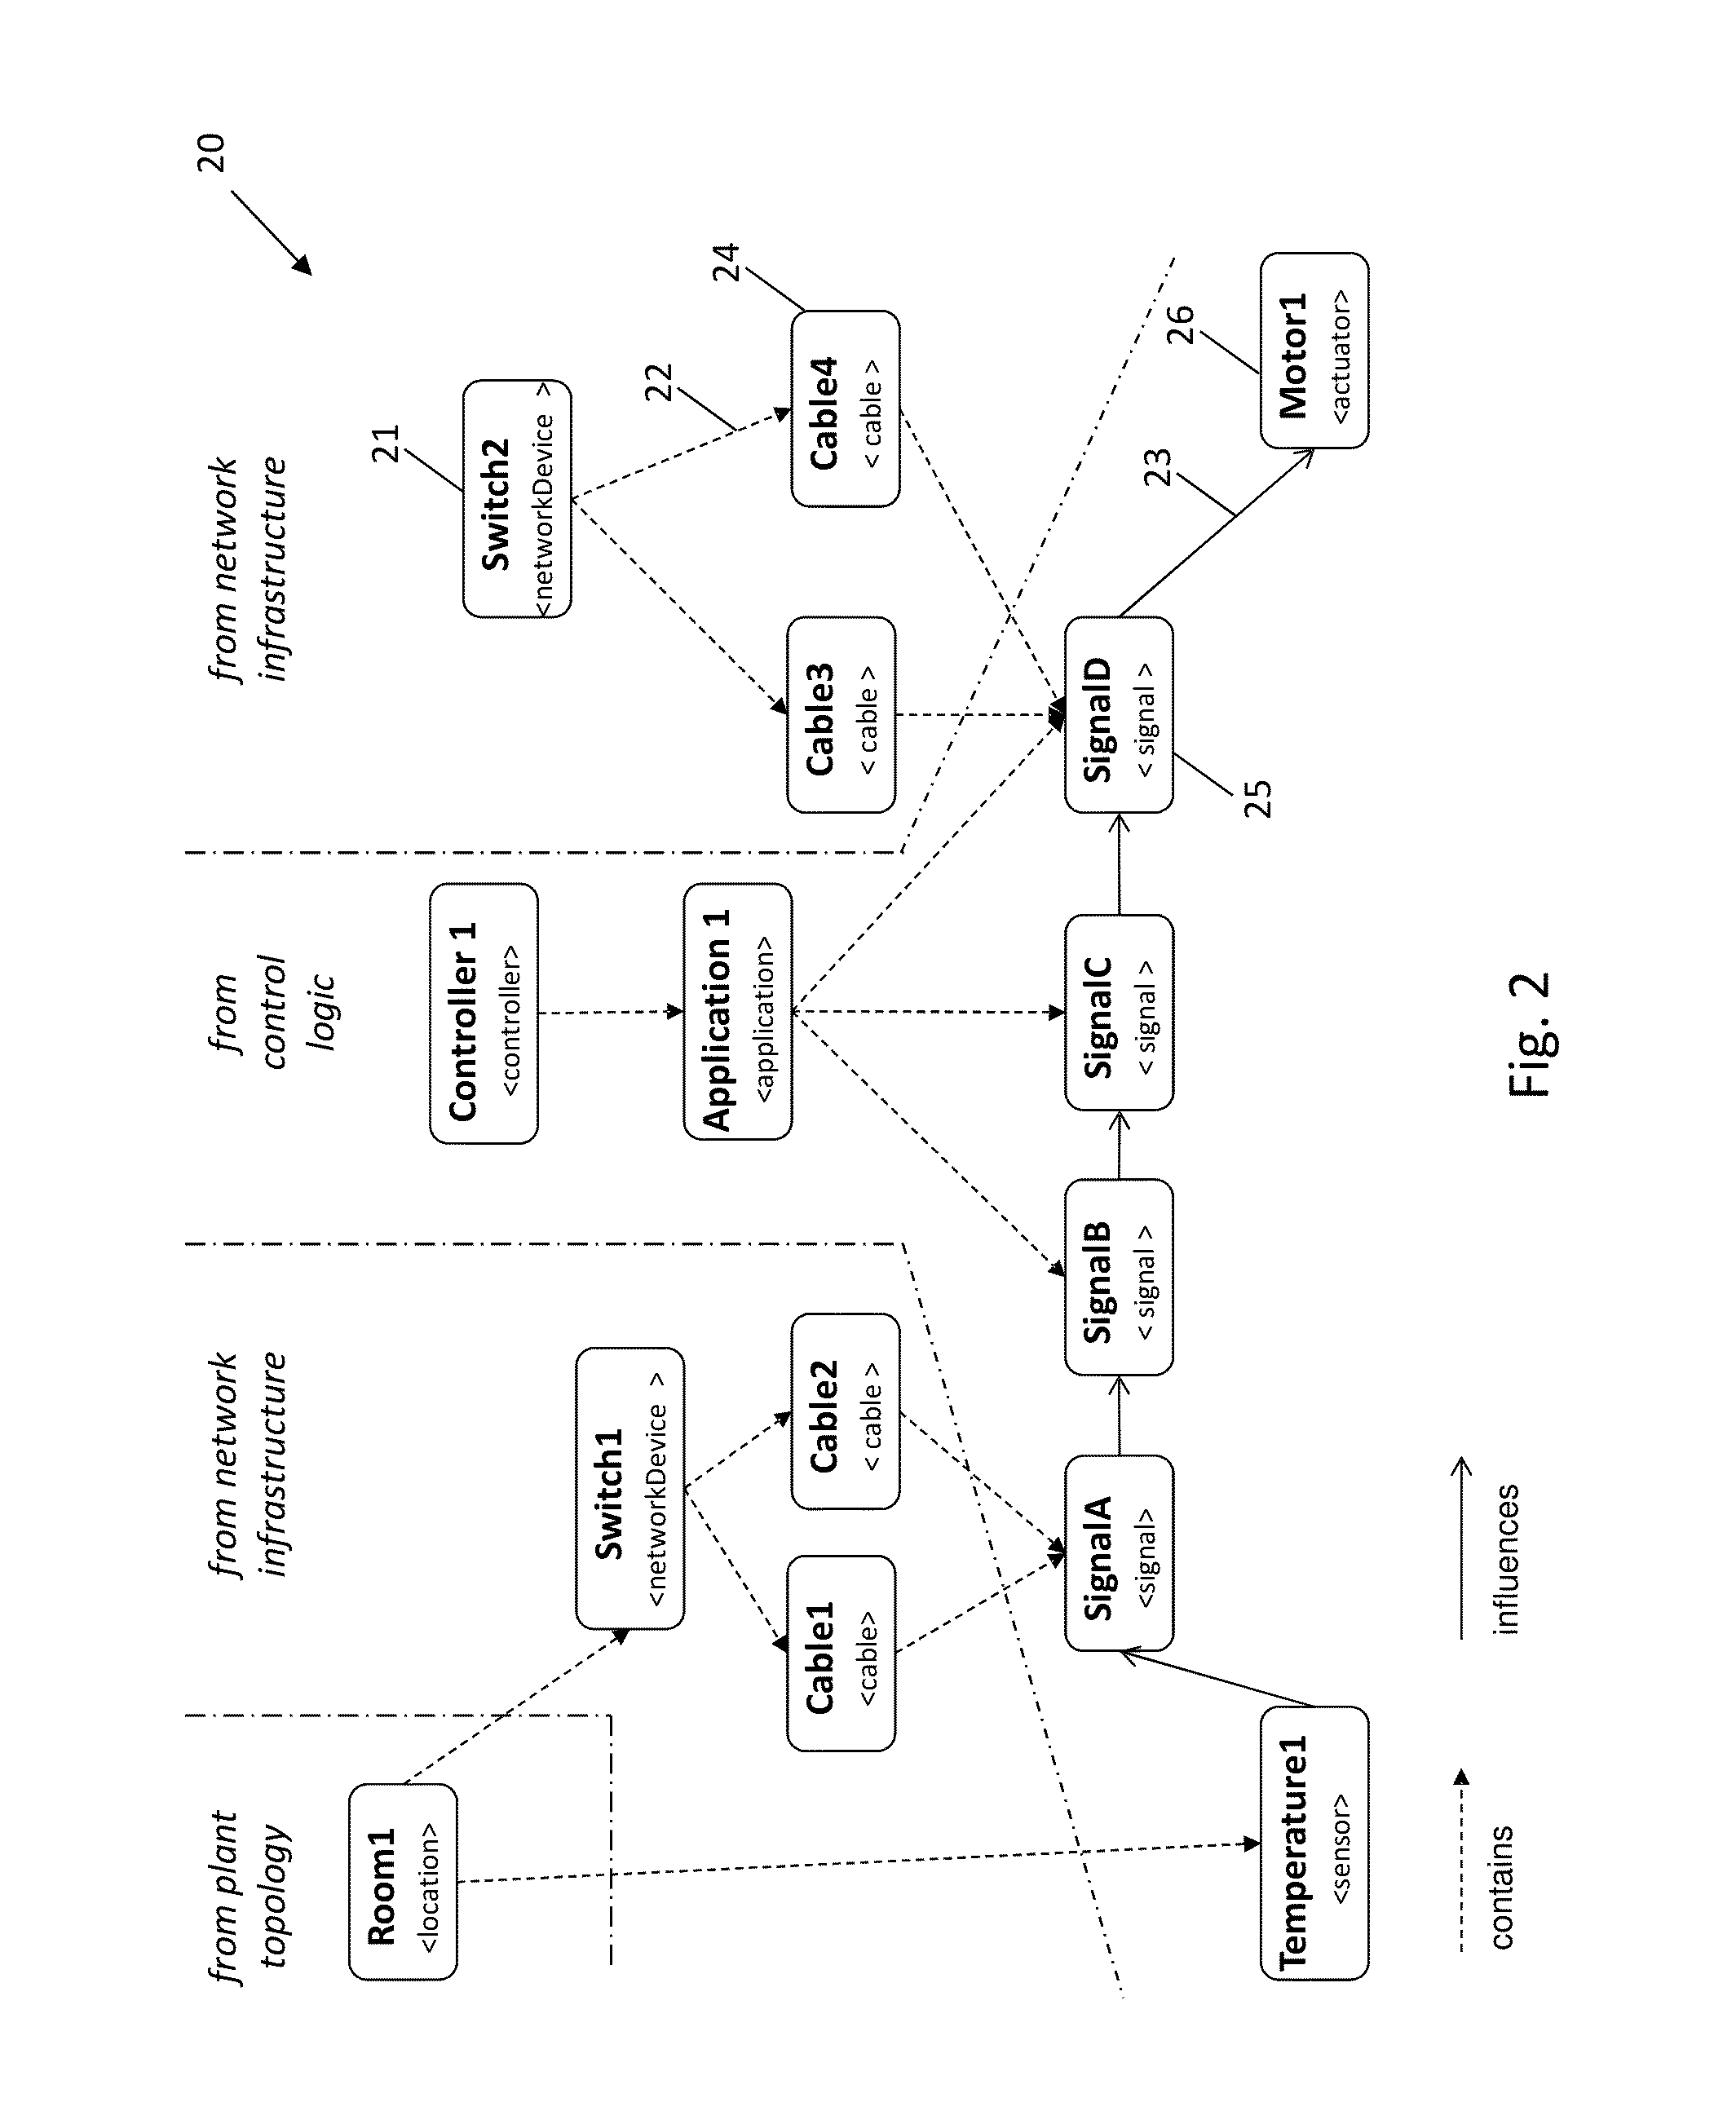 System analyzer and method for analyzing an impact of a change in a component of a distributed control system